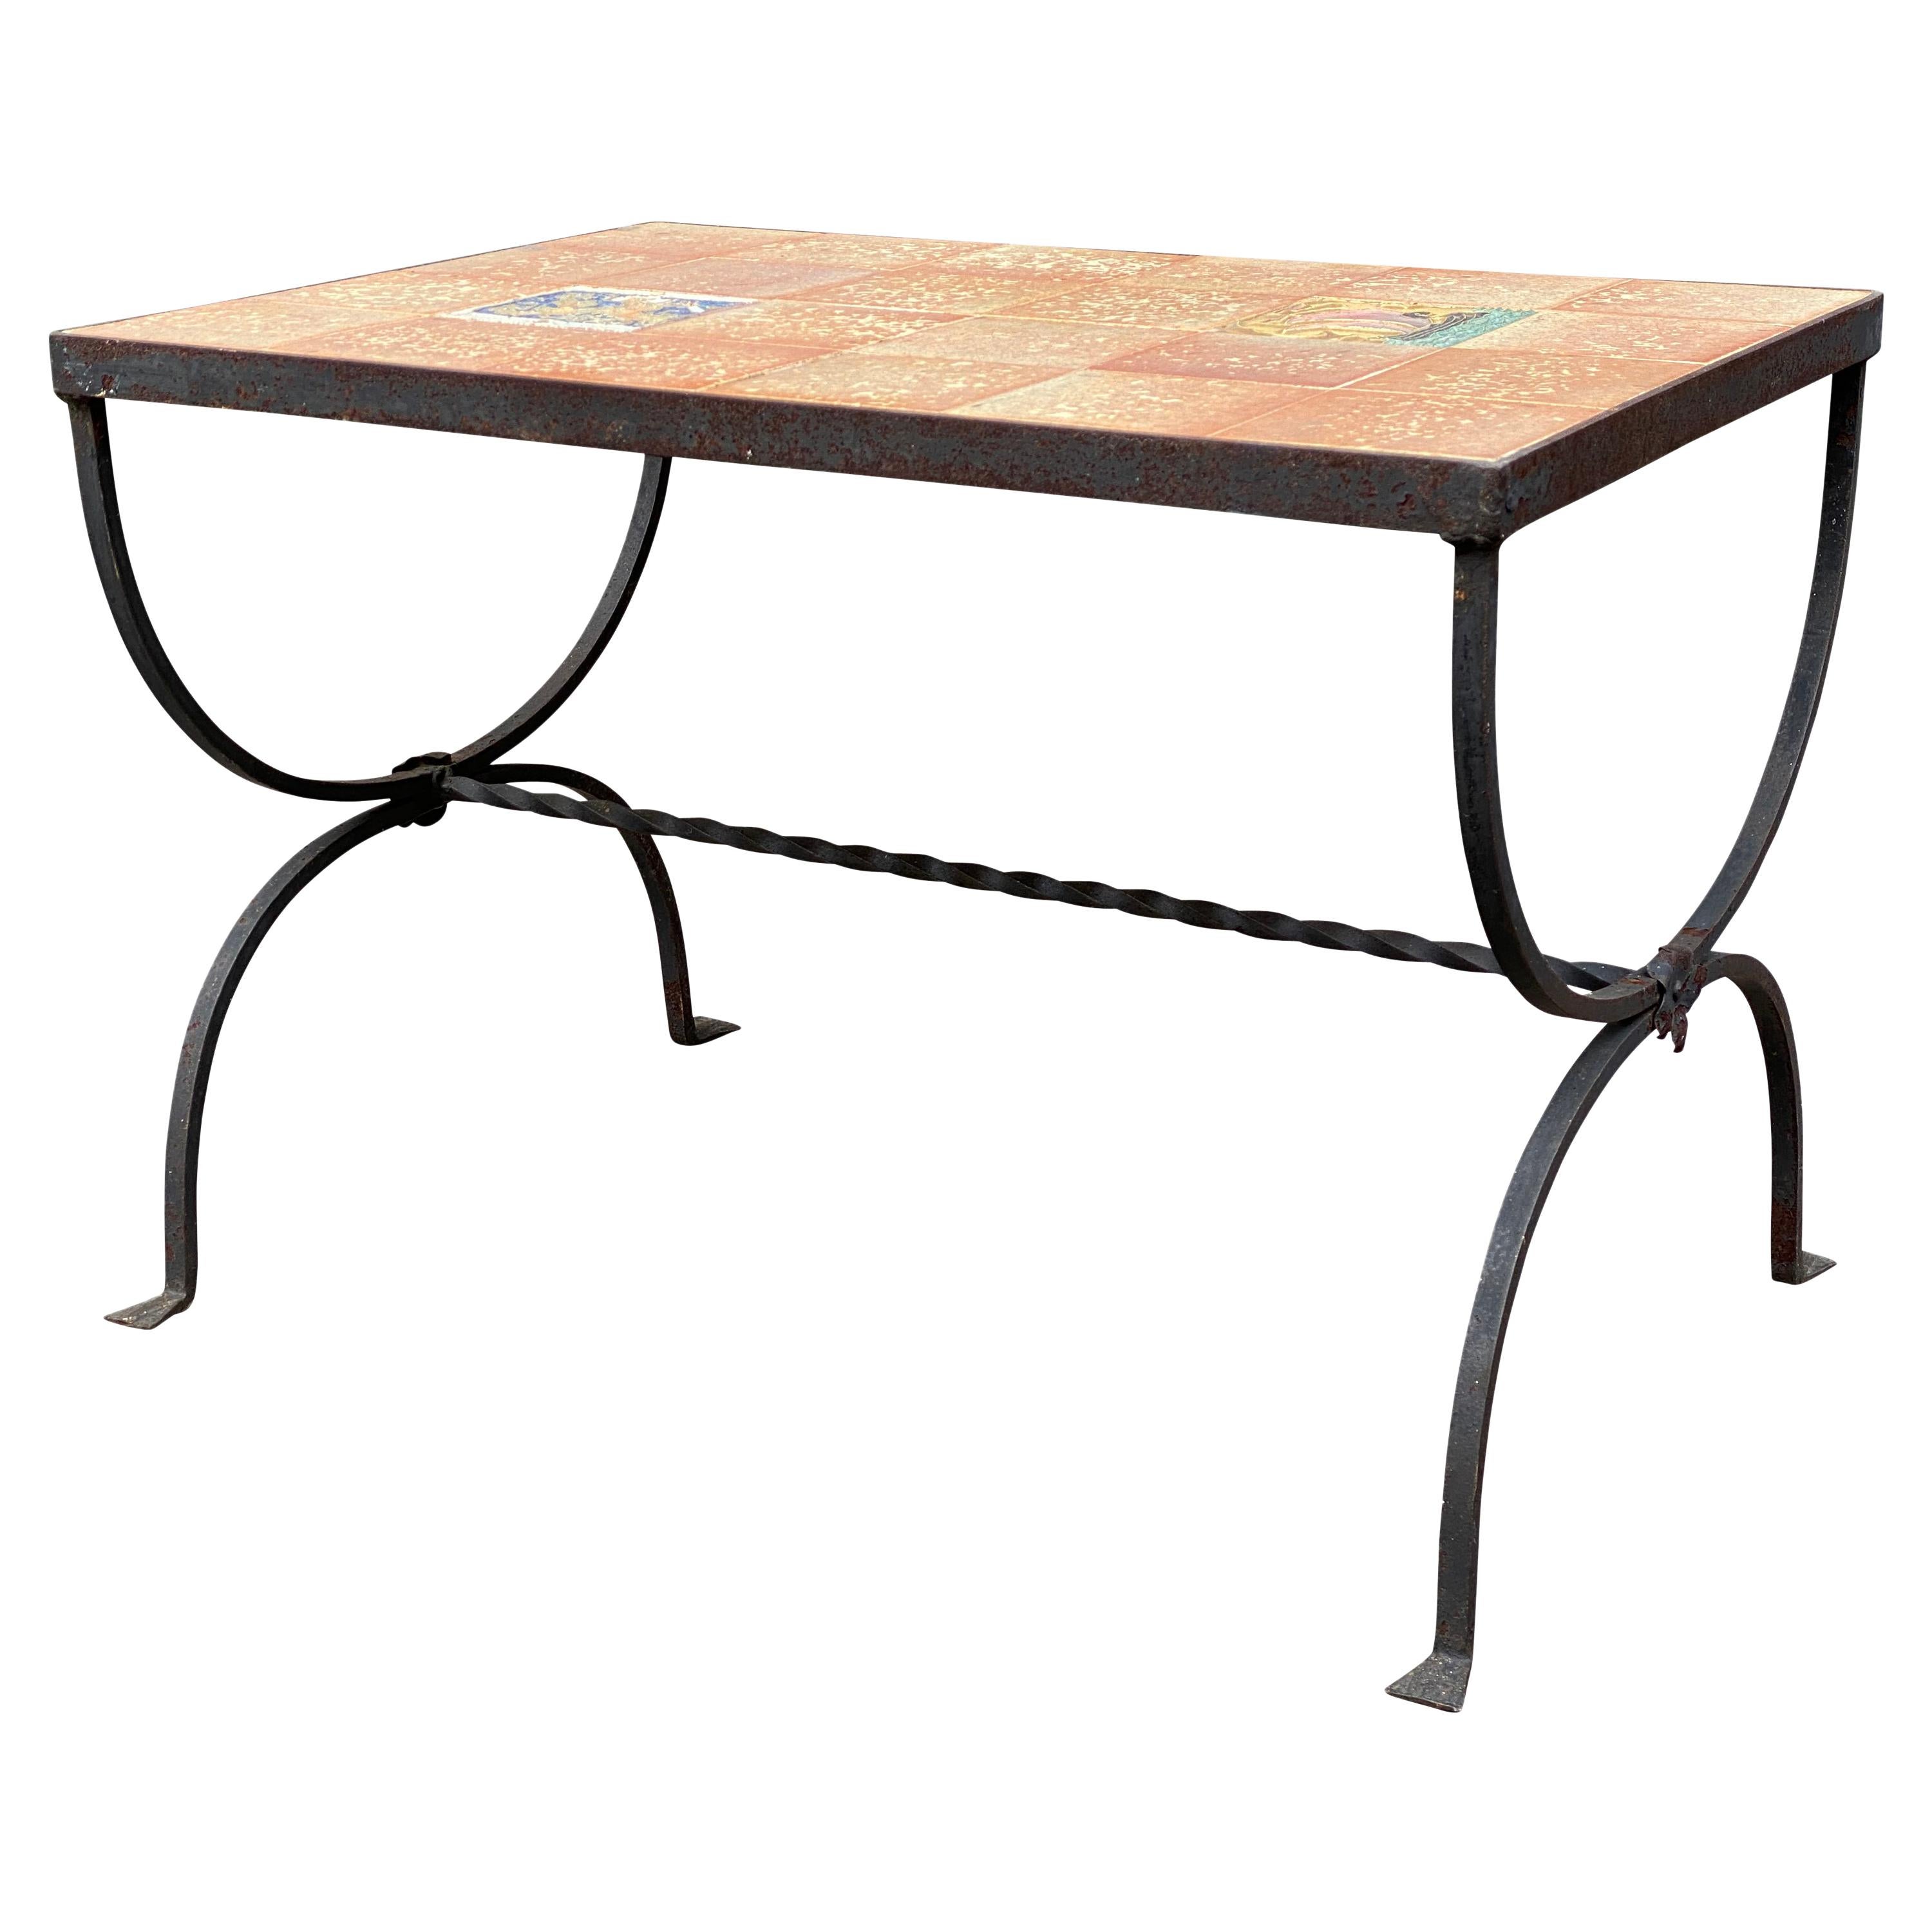 Tile Top Wrought Iron Table For Sale